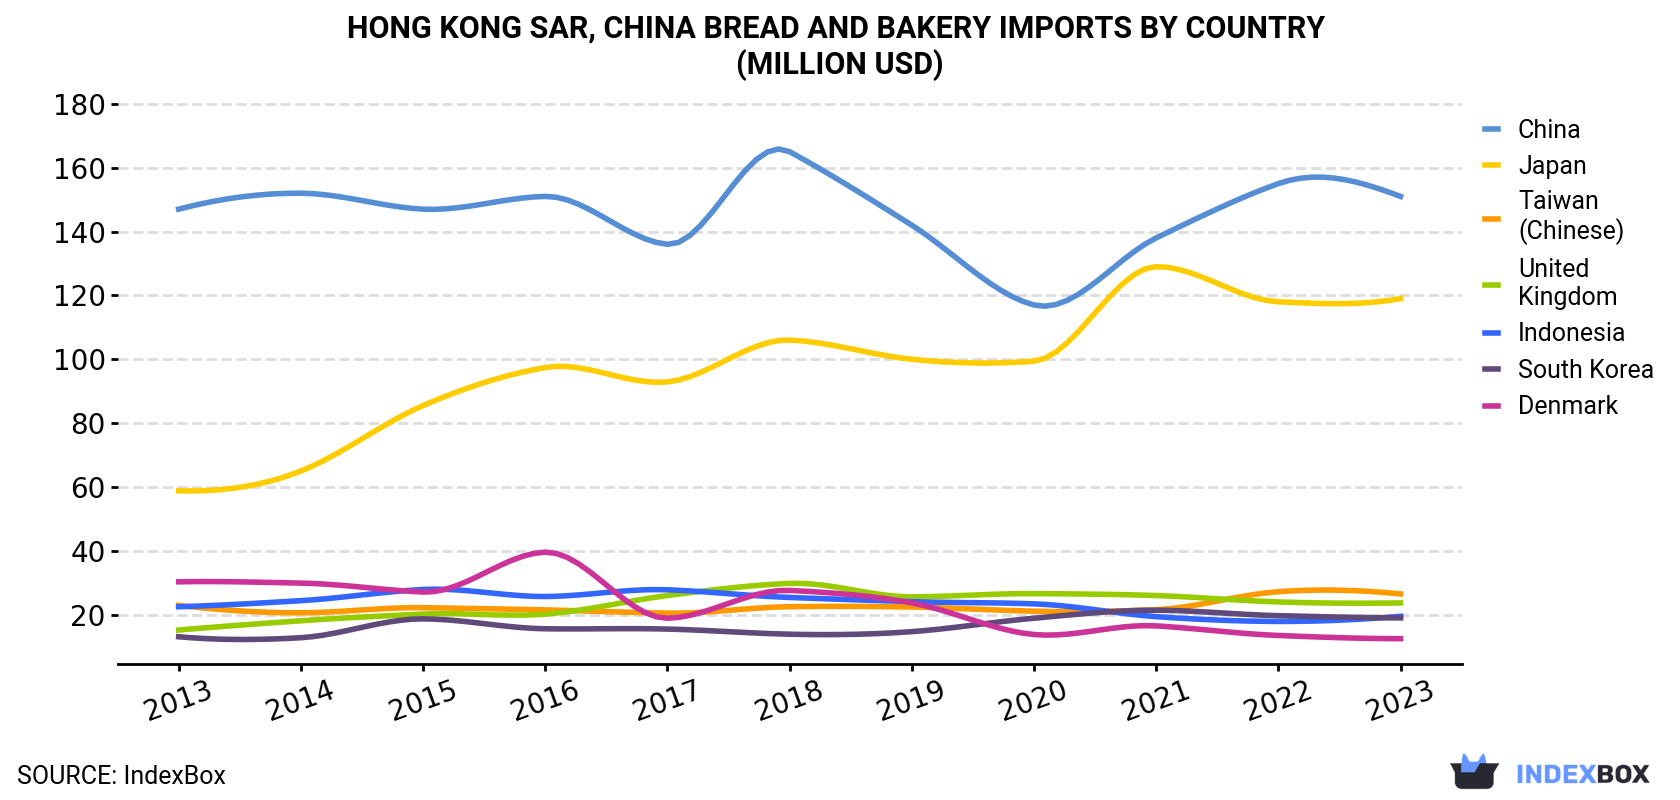 Hong Kong Bread and Bakery Imports By Country (Million USD)